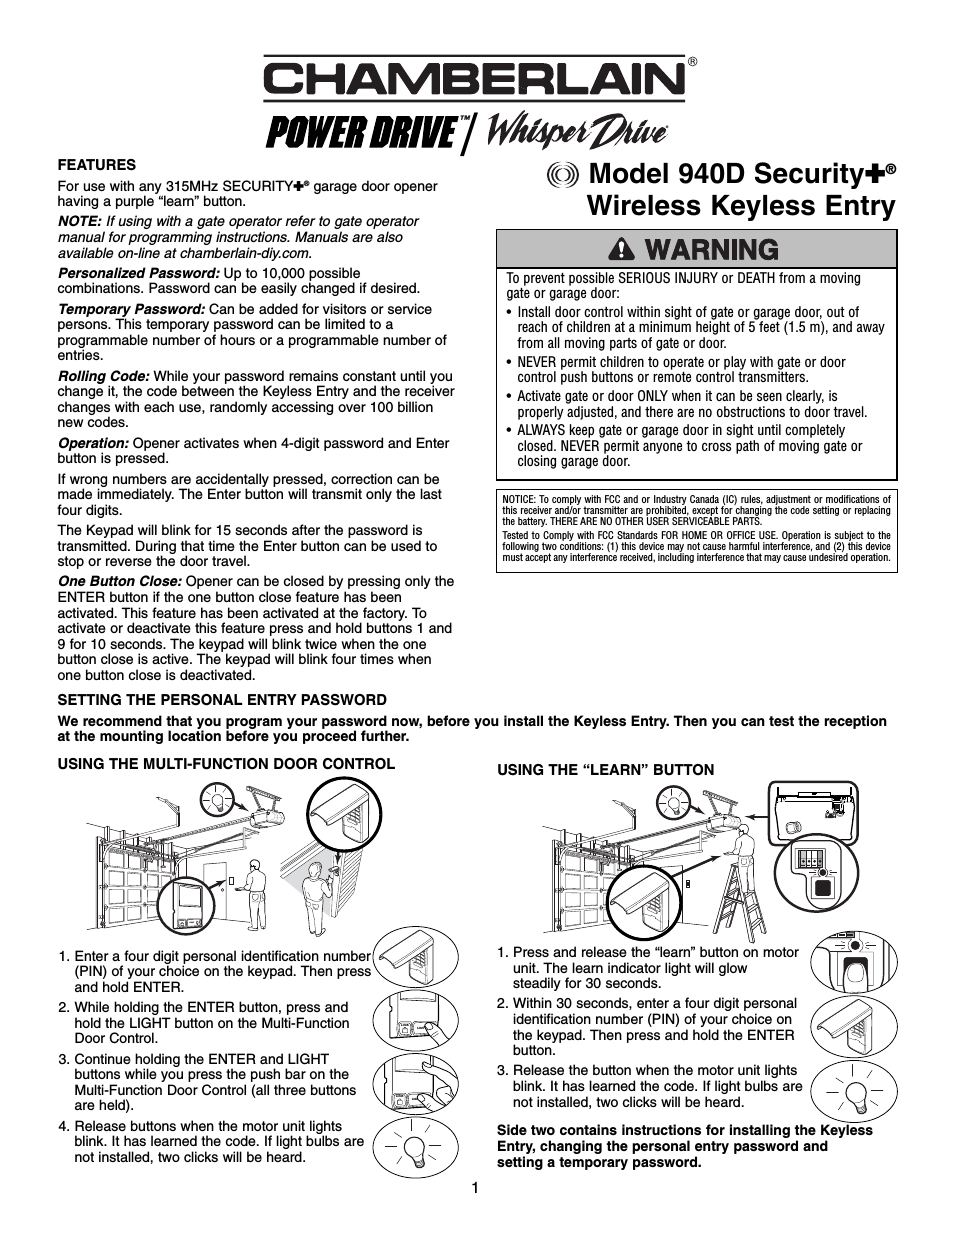 POWER DRIVE 940D (Page 1)